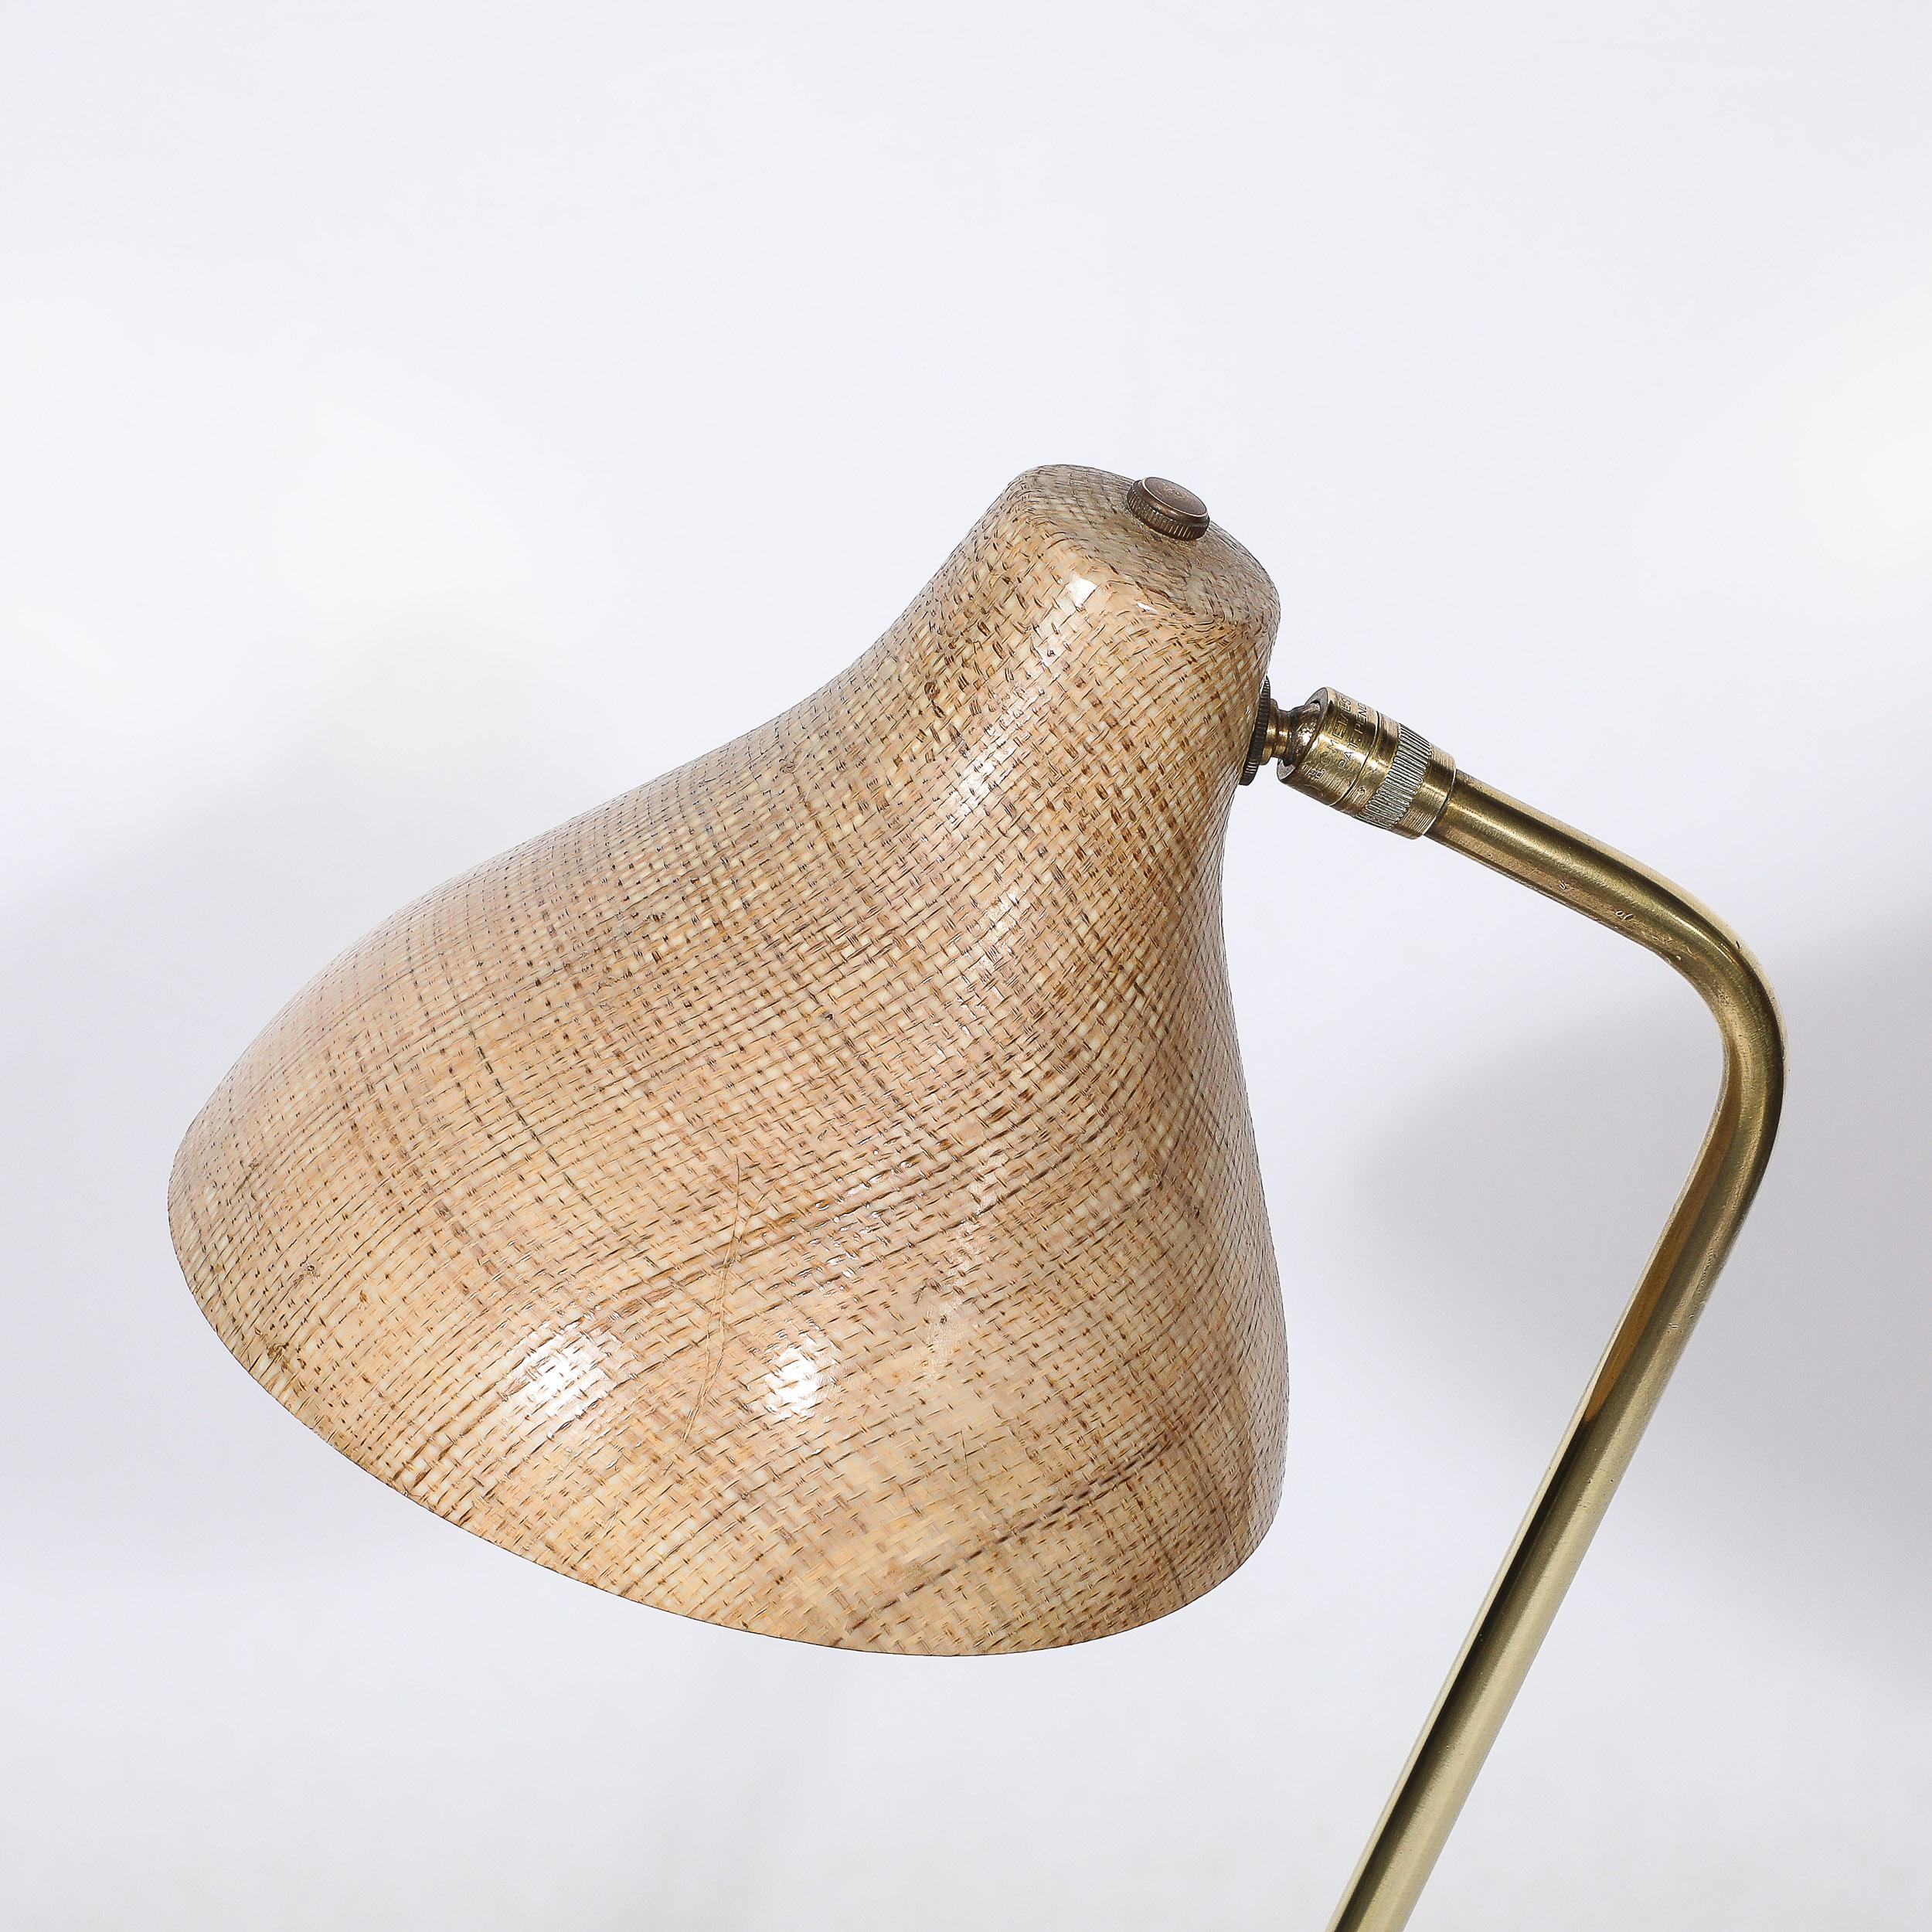 This minimal yet materially captivating Mid-Century Modernist Articulating Table Lamp in Striated Resin Shade & Polished Brass Base originates from the Untied States, Circa 1950. Features a lovely organic shade in caste resin. One can view a variety